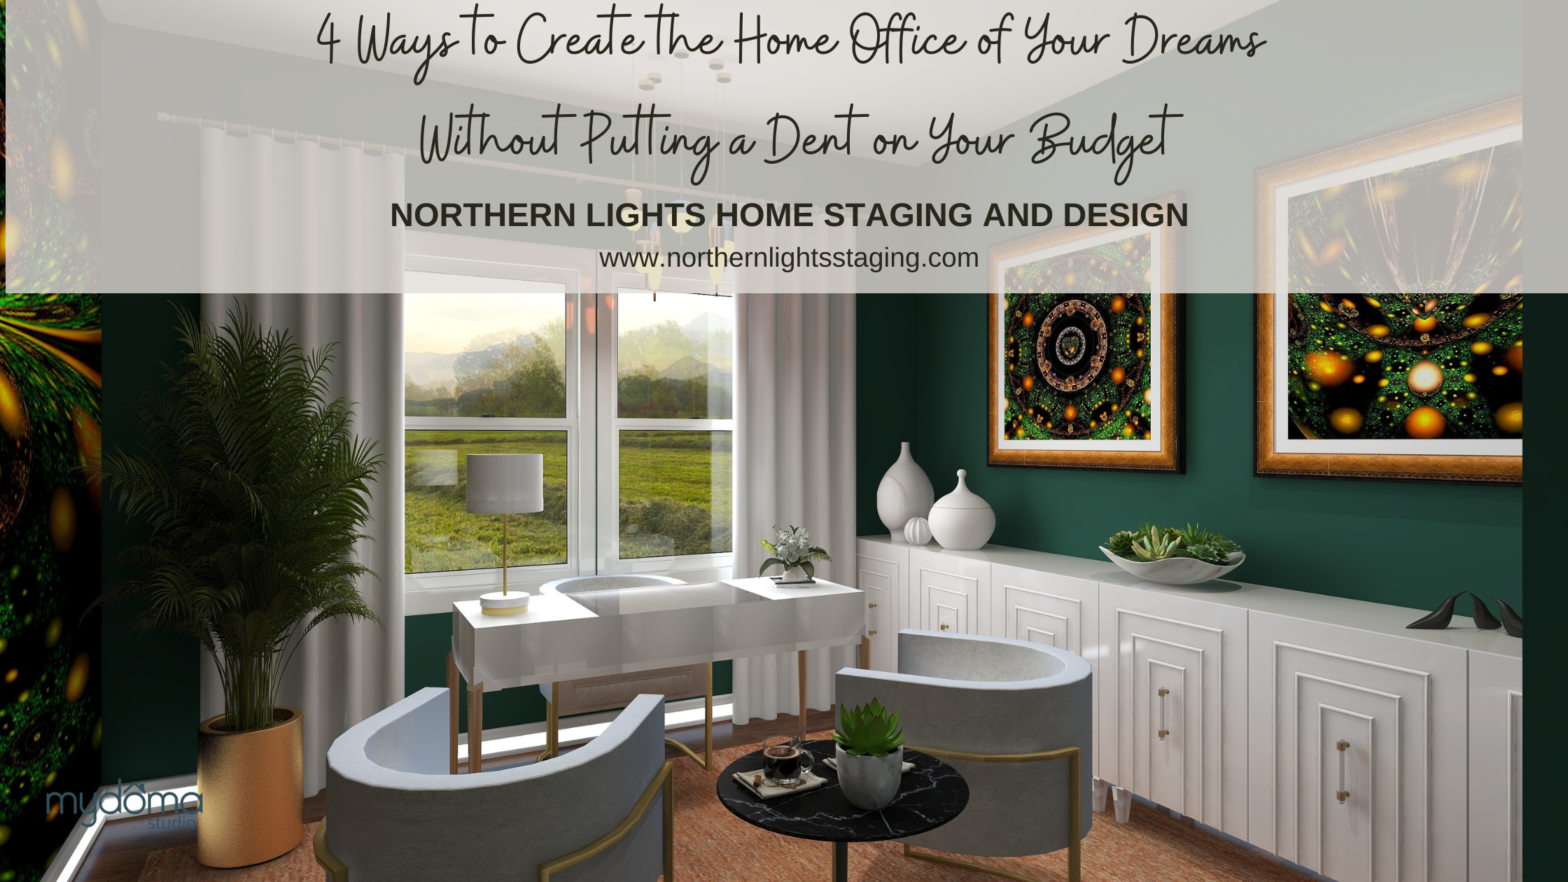 4 Ways to Create the Home Office of Your Dreams Without Putting a Dent on Your Budget. By Suzie Wilson for Northern Lights Home Staging and Design.